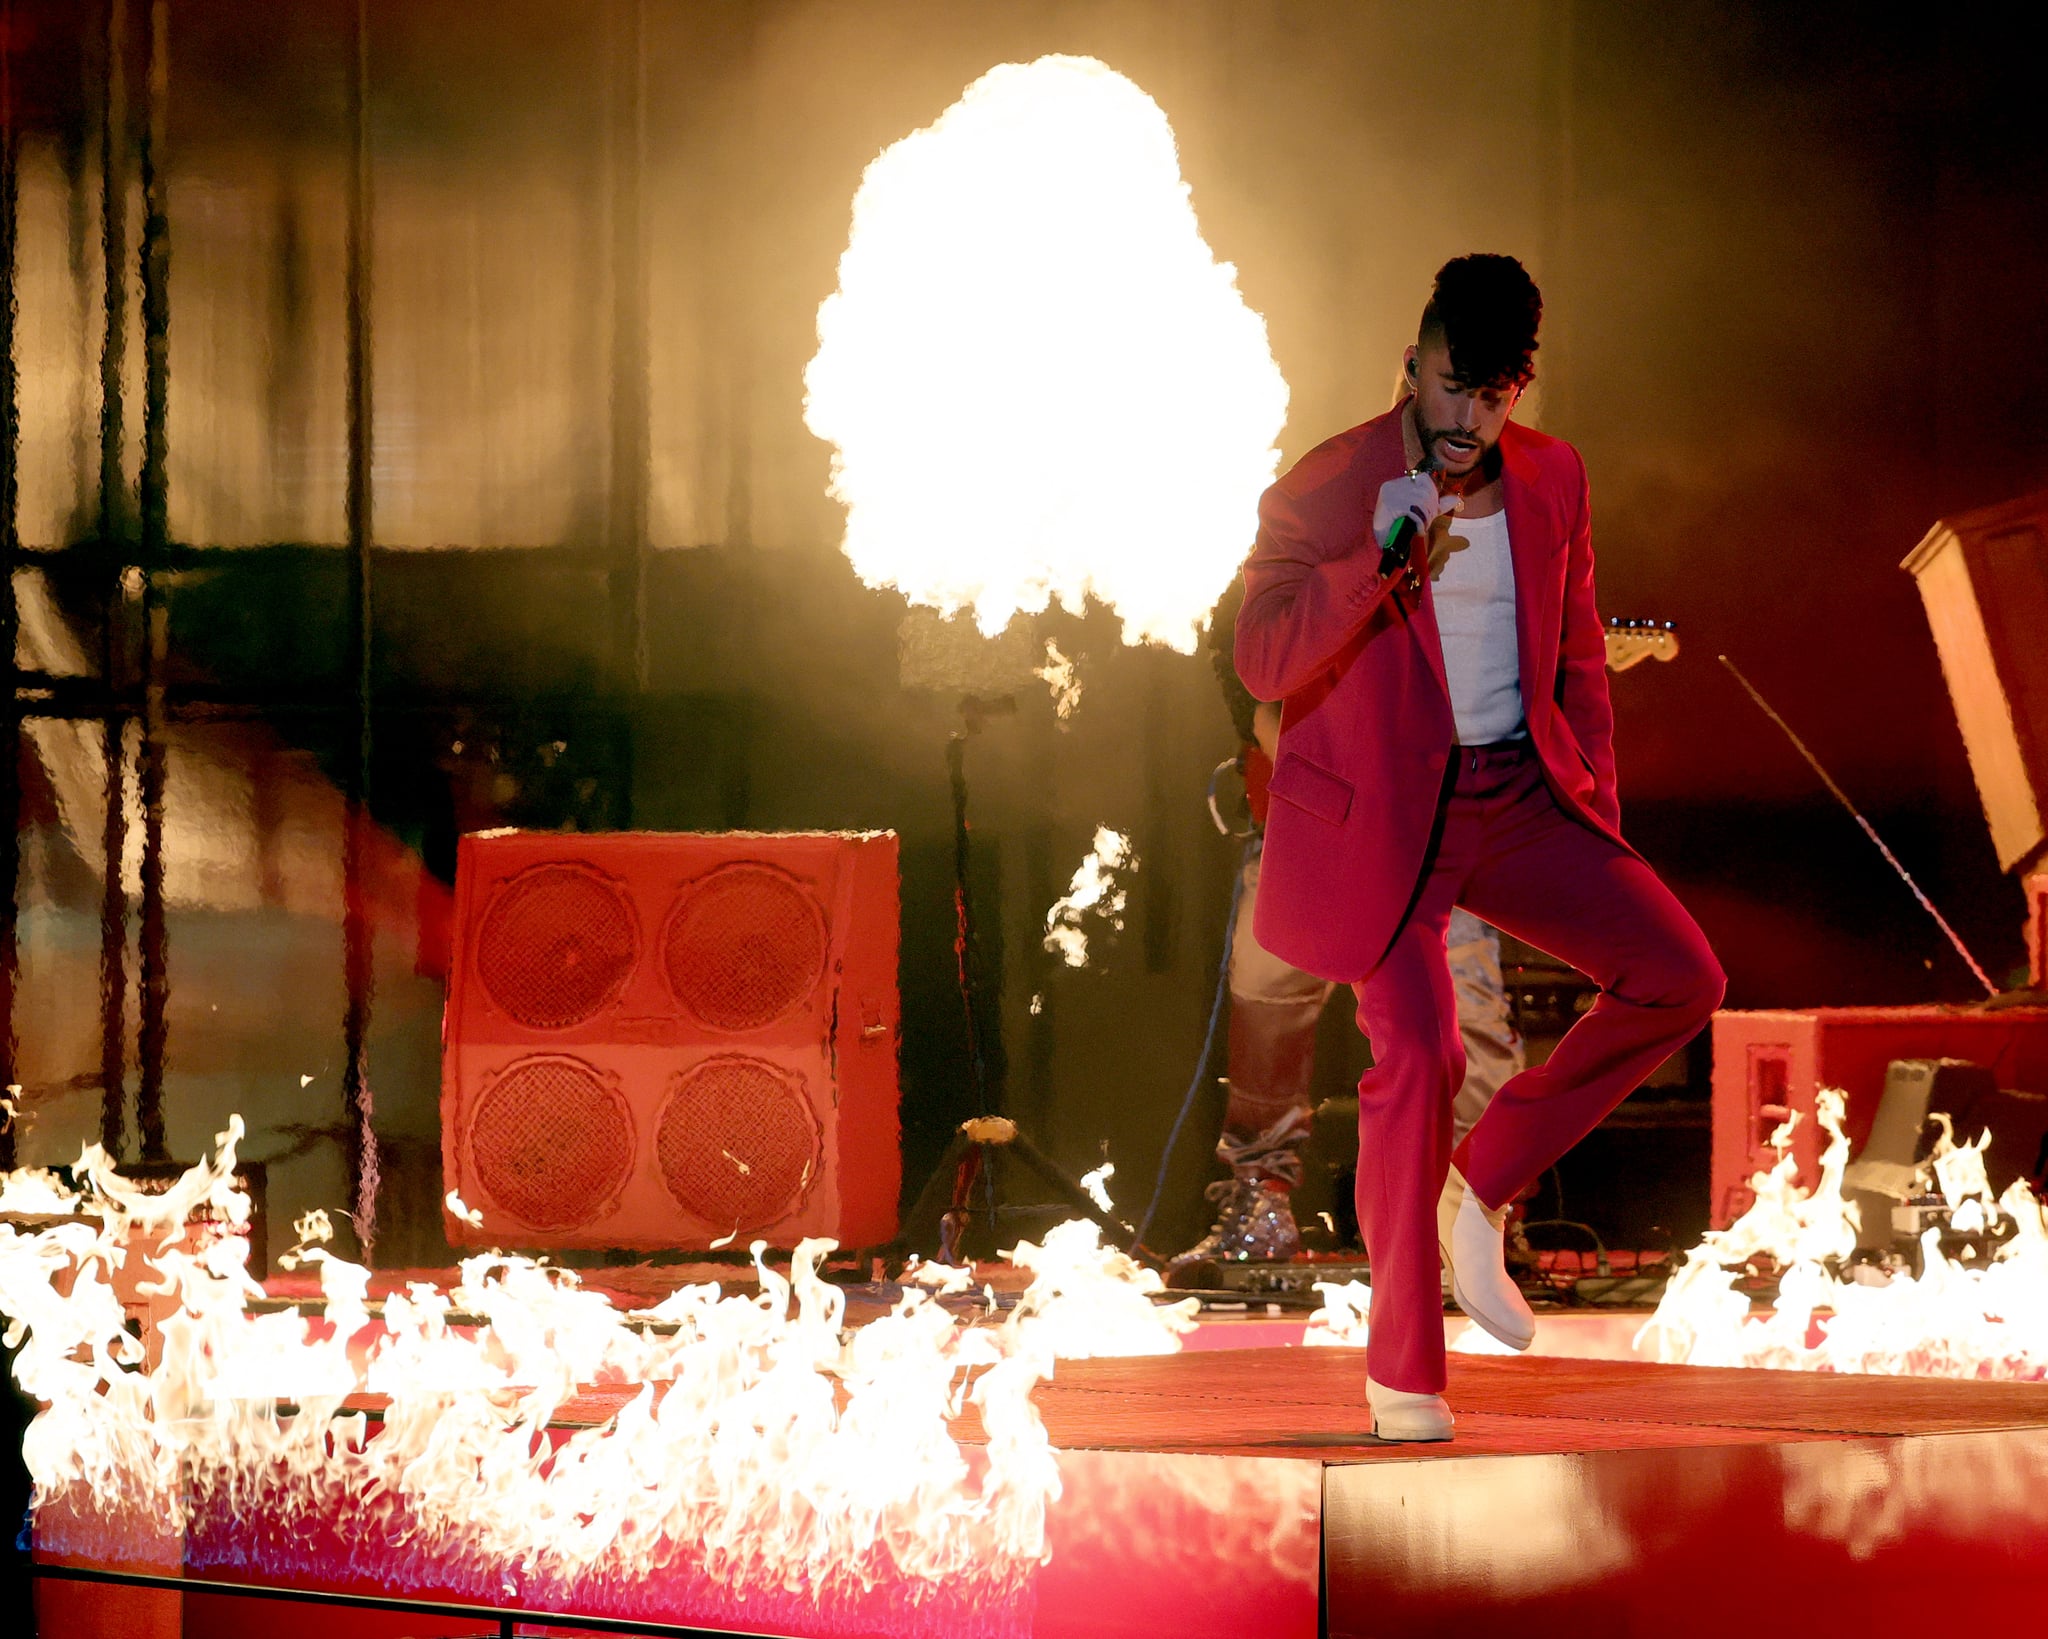 LAS VEGAS, NEVADA - NOVEMBER 18: Bad Bunny performs onstage during The 22nd Annual Latin GRAMMY Awards at MGM Grand Garden Arena on November 18, 2021 in Las Vegas, Nevada. (Photo by Ethan Miller/Getty Images)